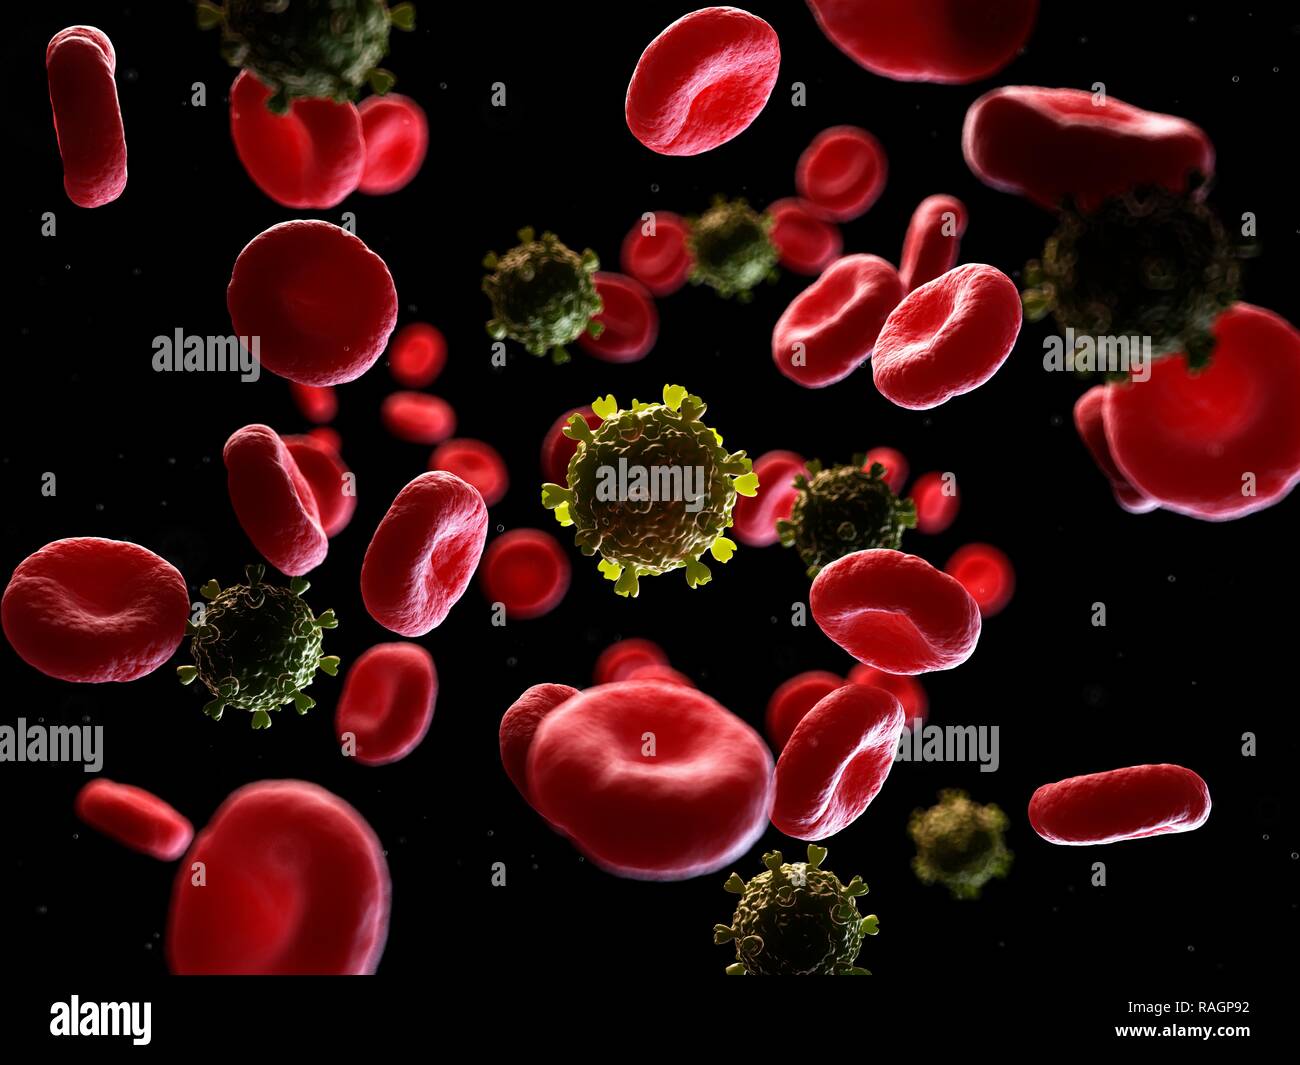 Illustration of HIV particles in human blood. Stock Photo